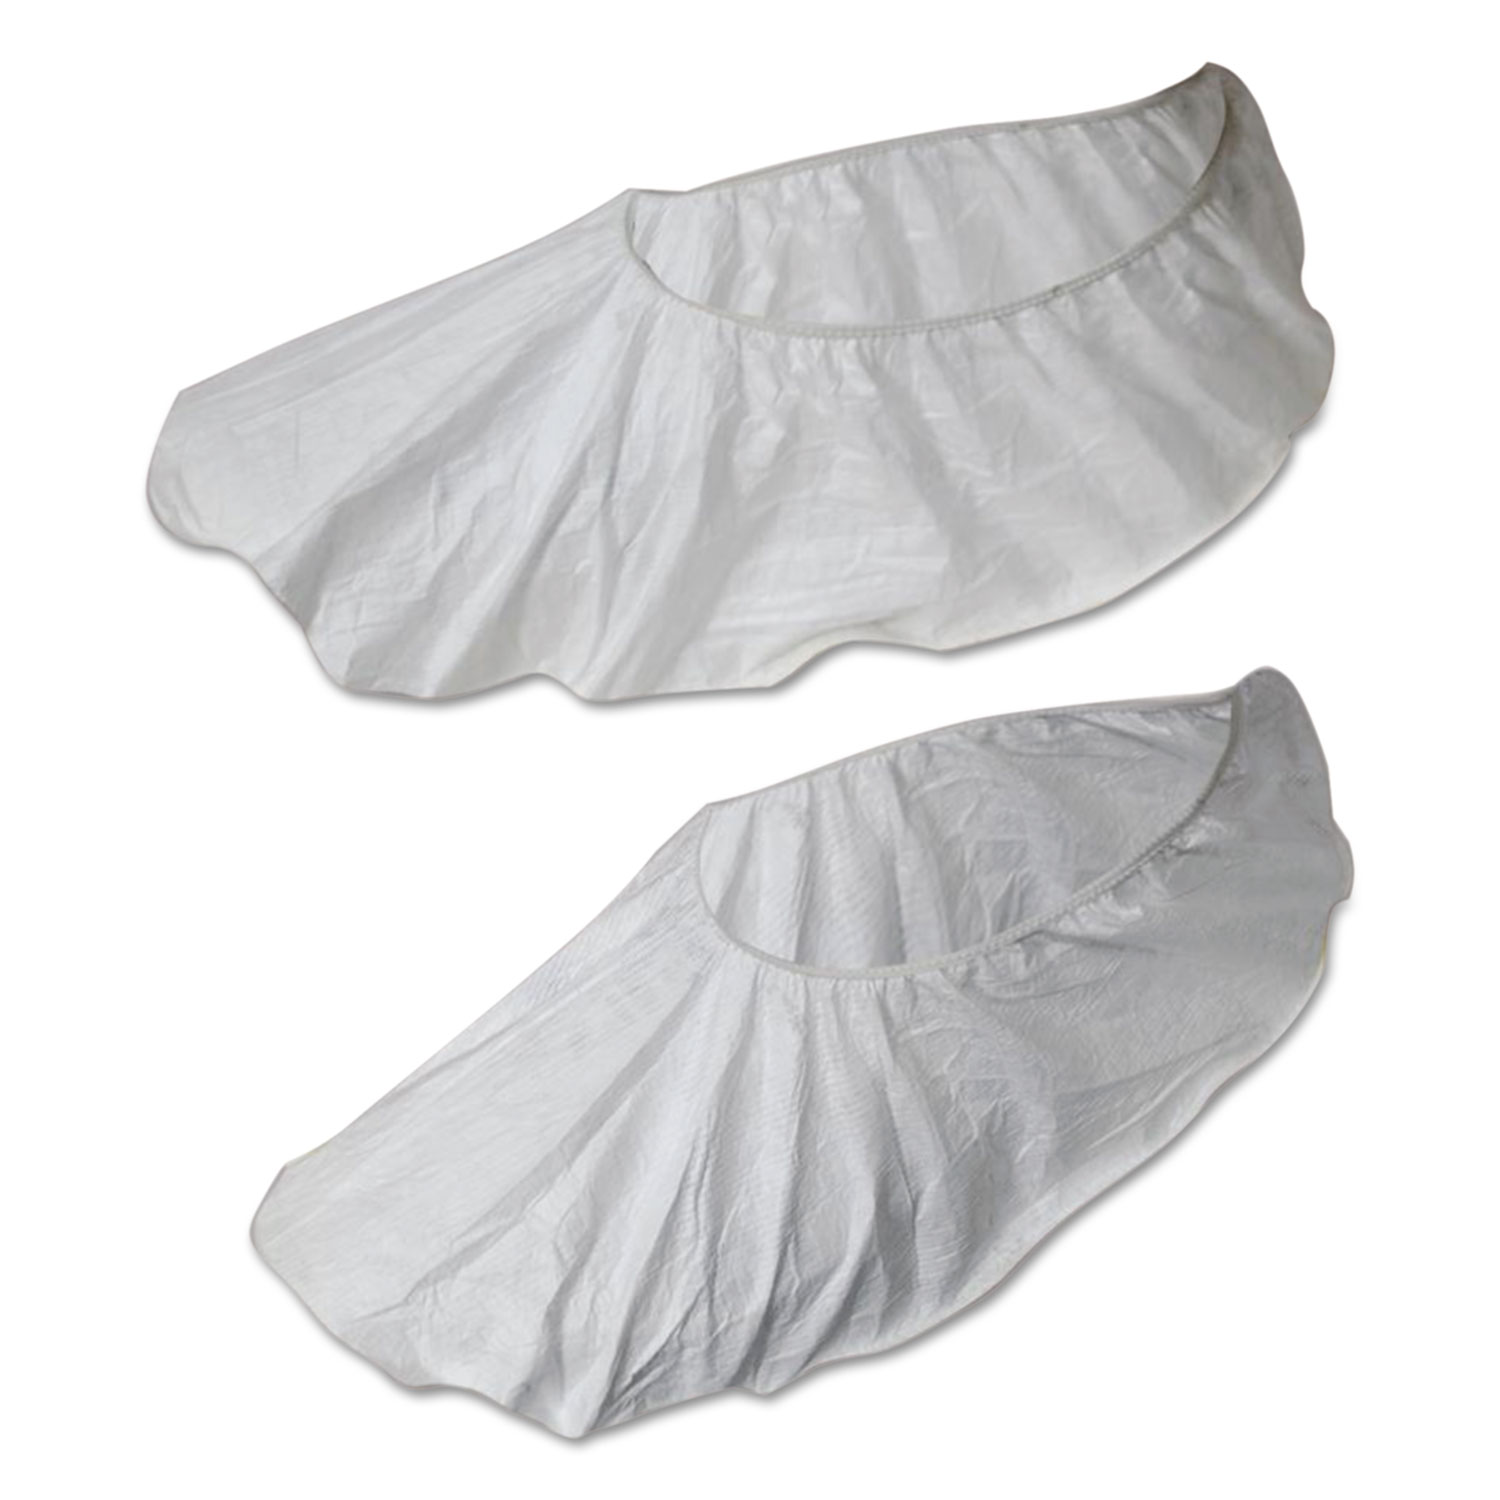  Boardwalk BWK00031L Disposable Shoe Covers, White, Large, 50 Pair/Pack (BWK00031L) 